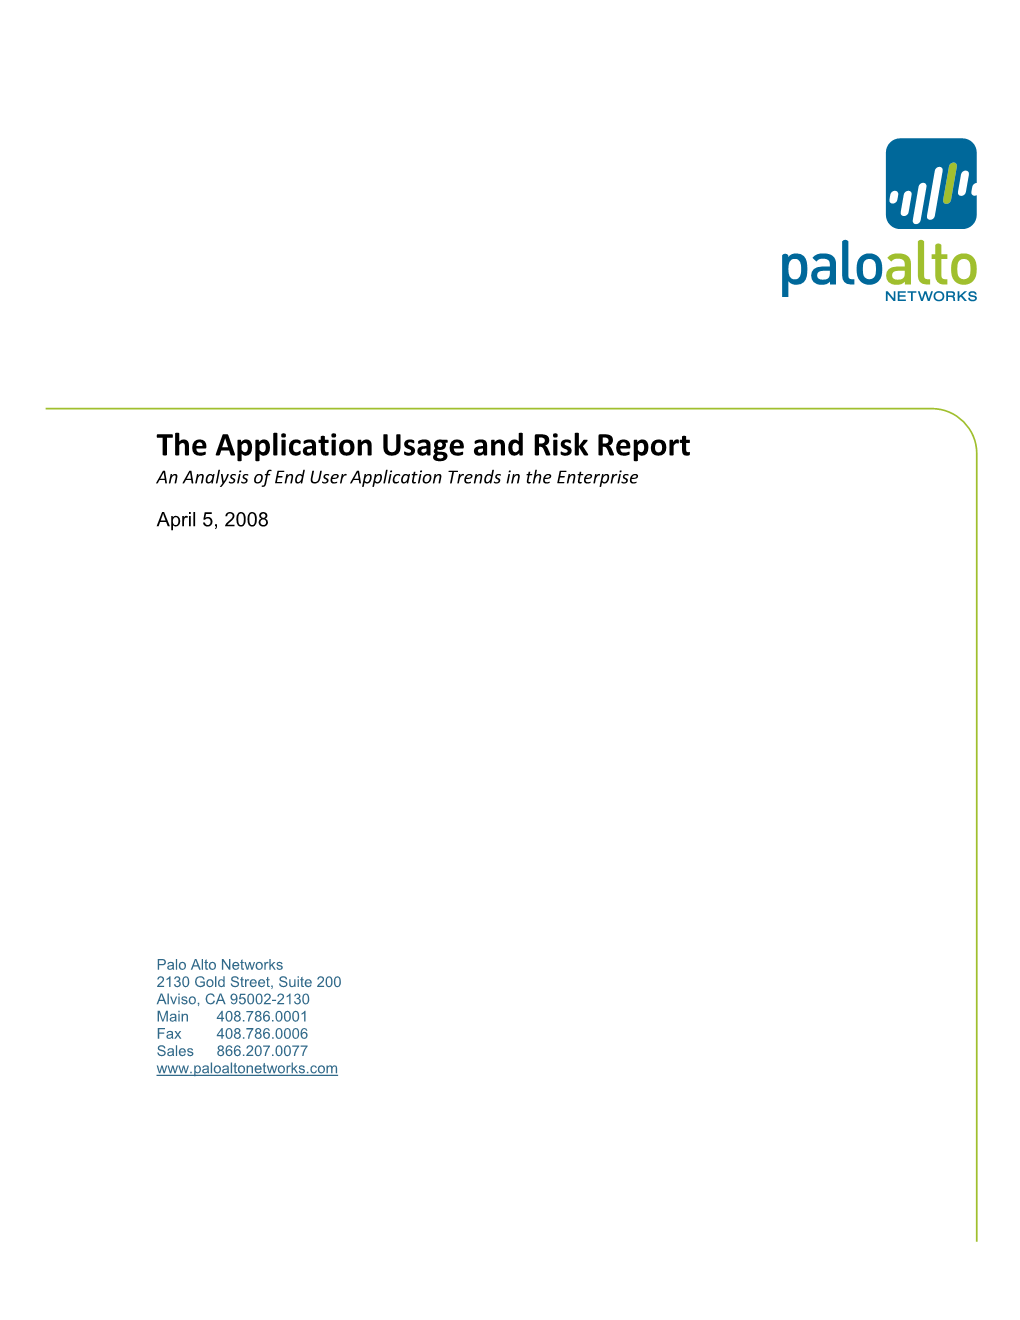 The Application Usage and Risk Report an Analysis of End User Application Trends in the Enterprise